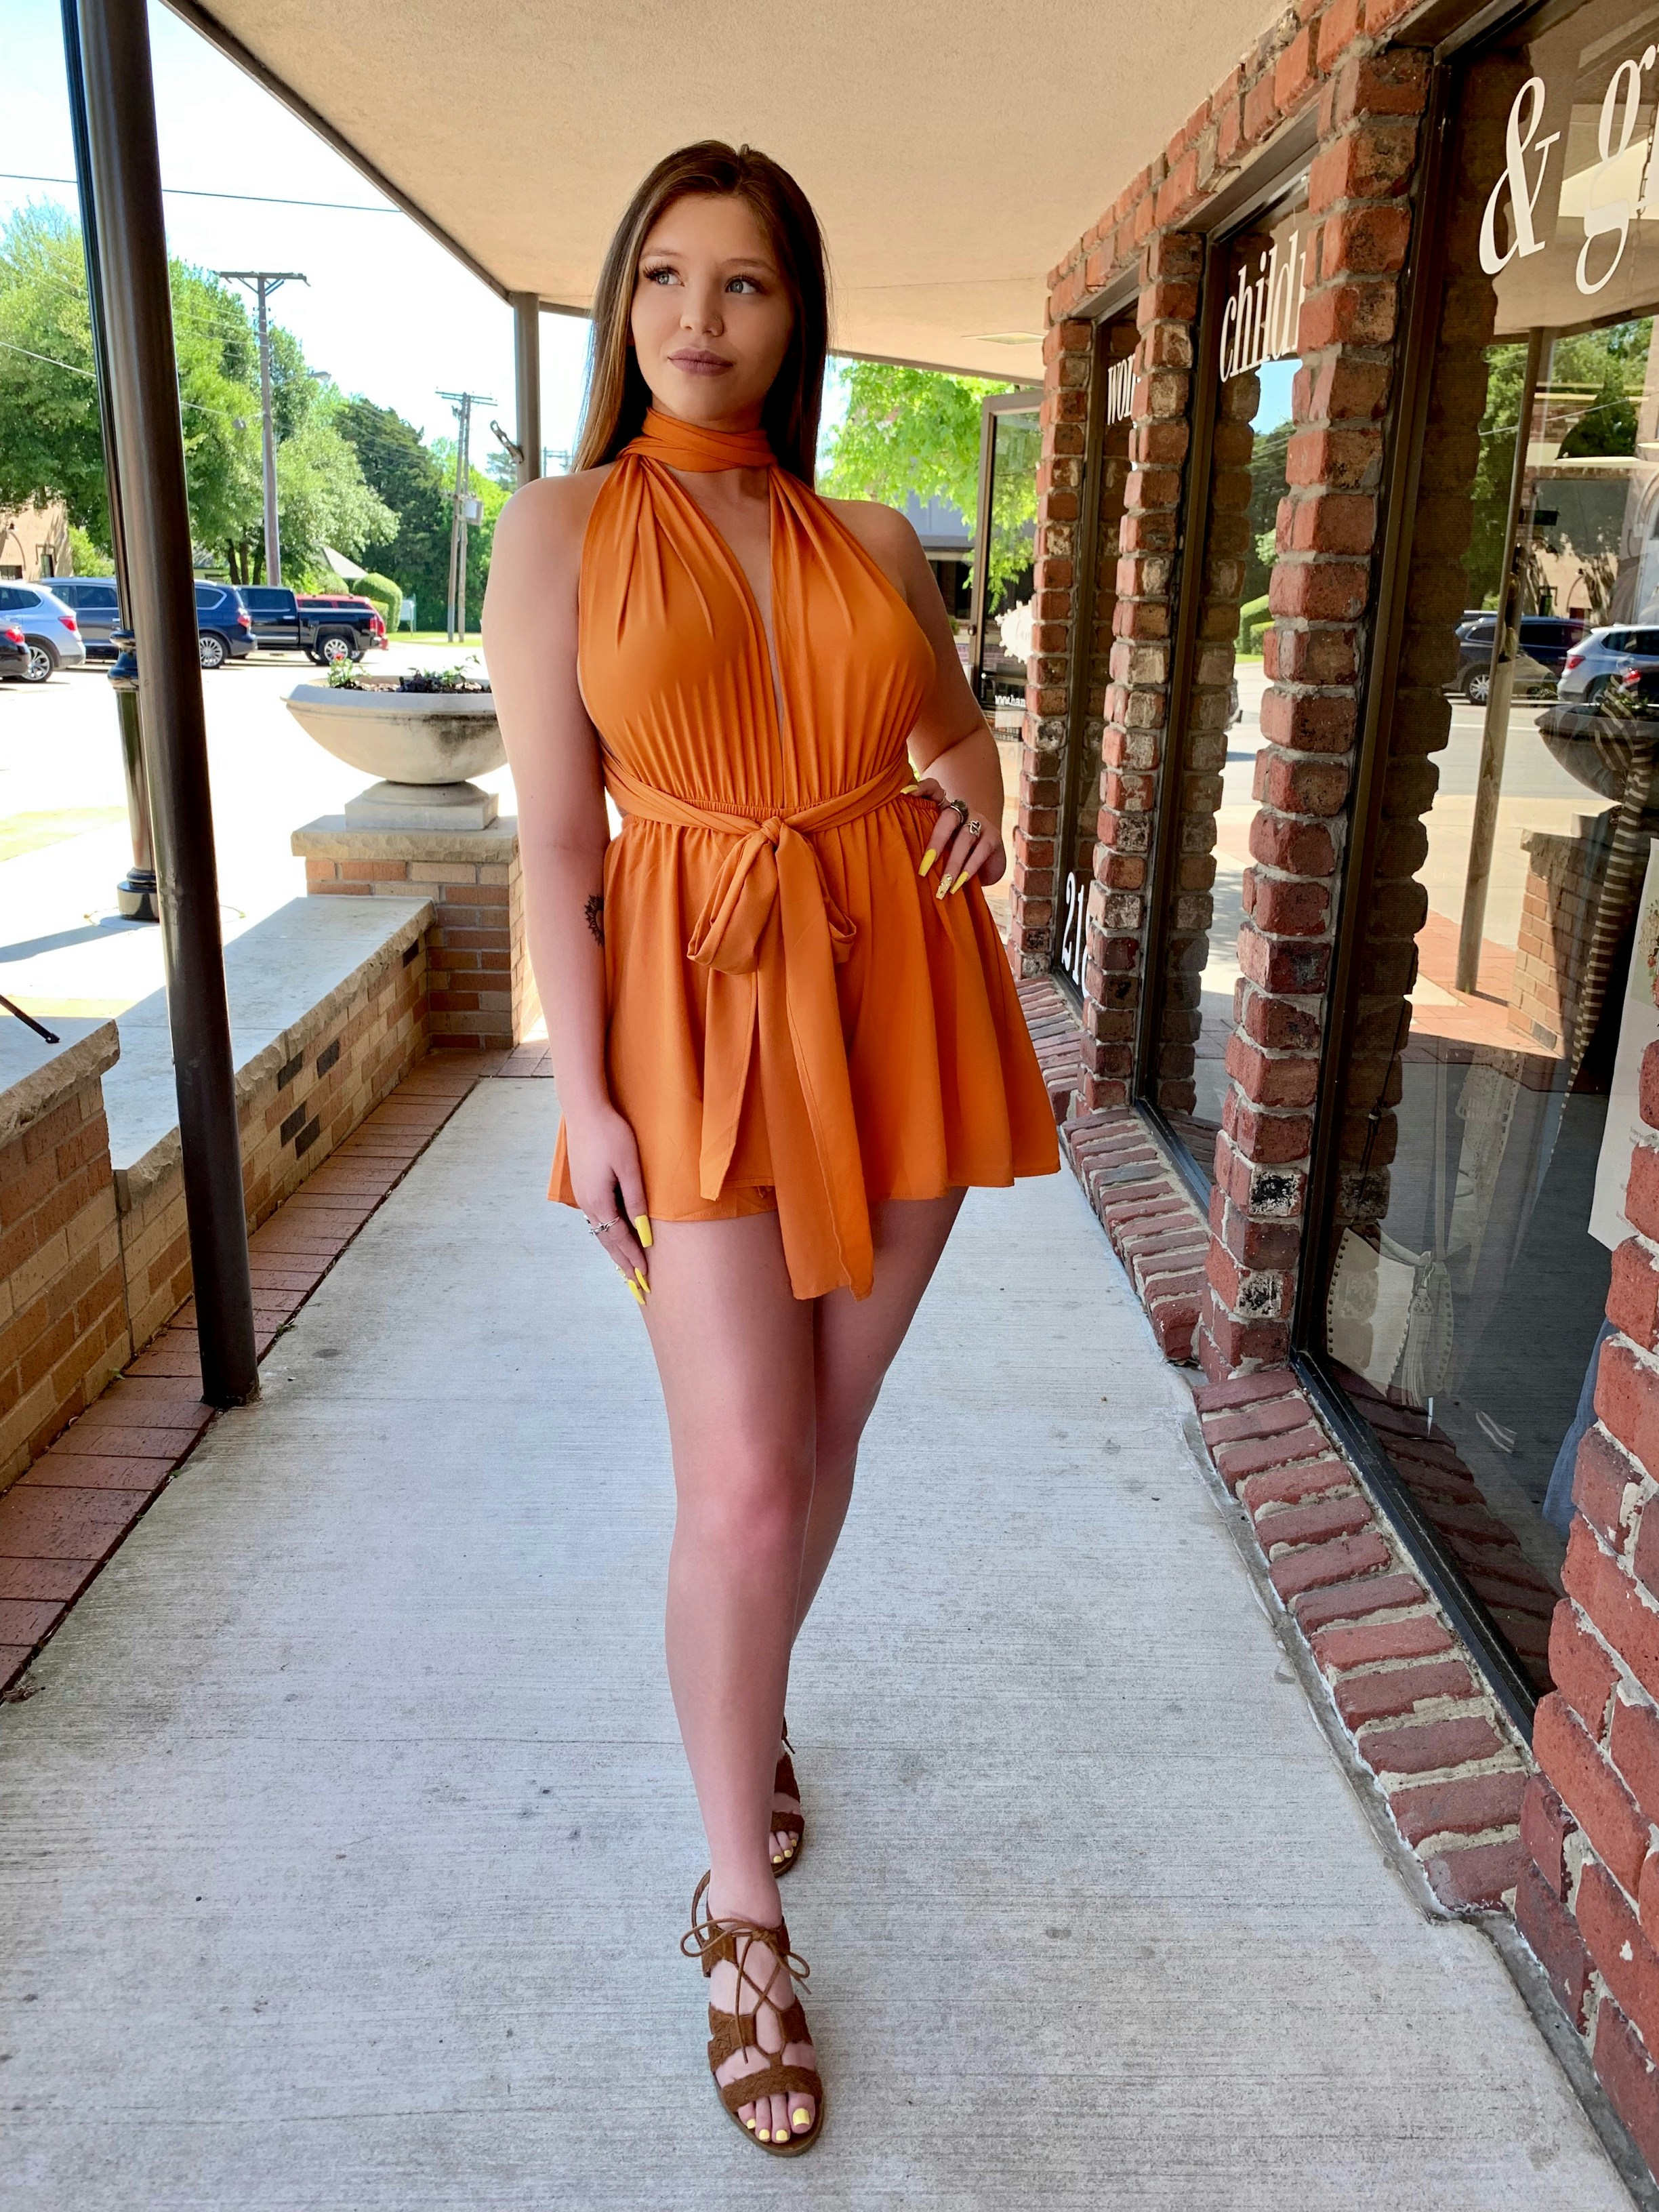 great photo recipe,how to photograph a woman in an orange dress standing on a sidewalk